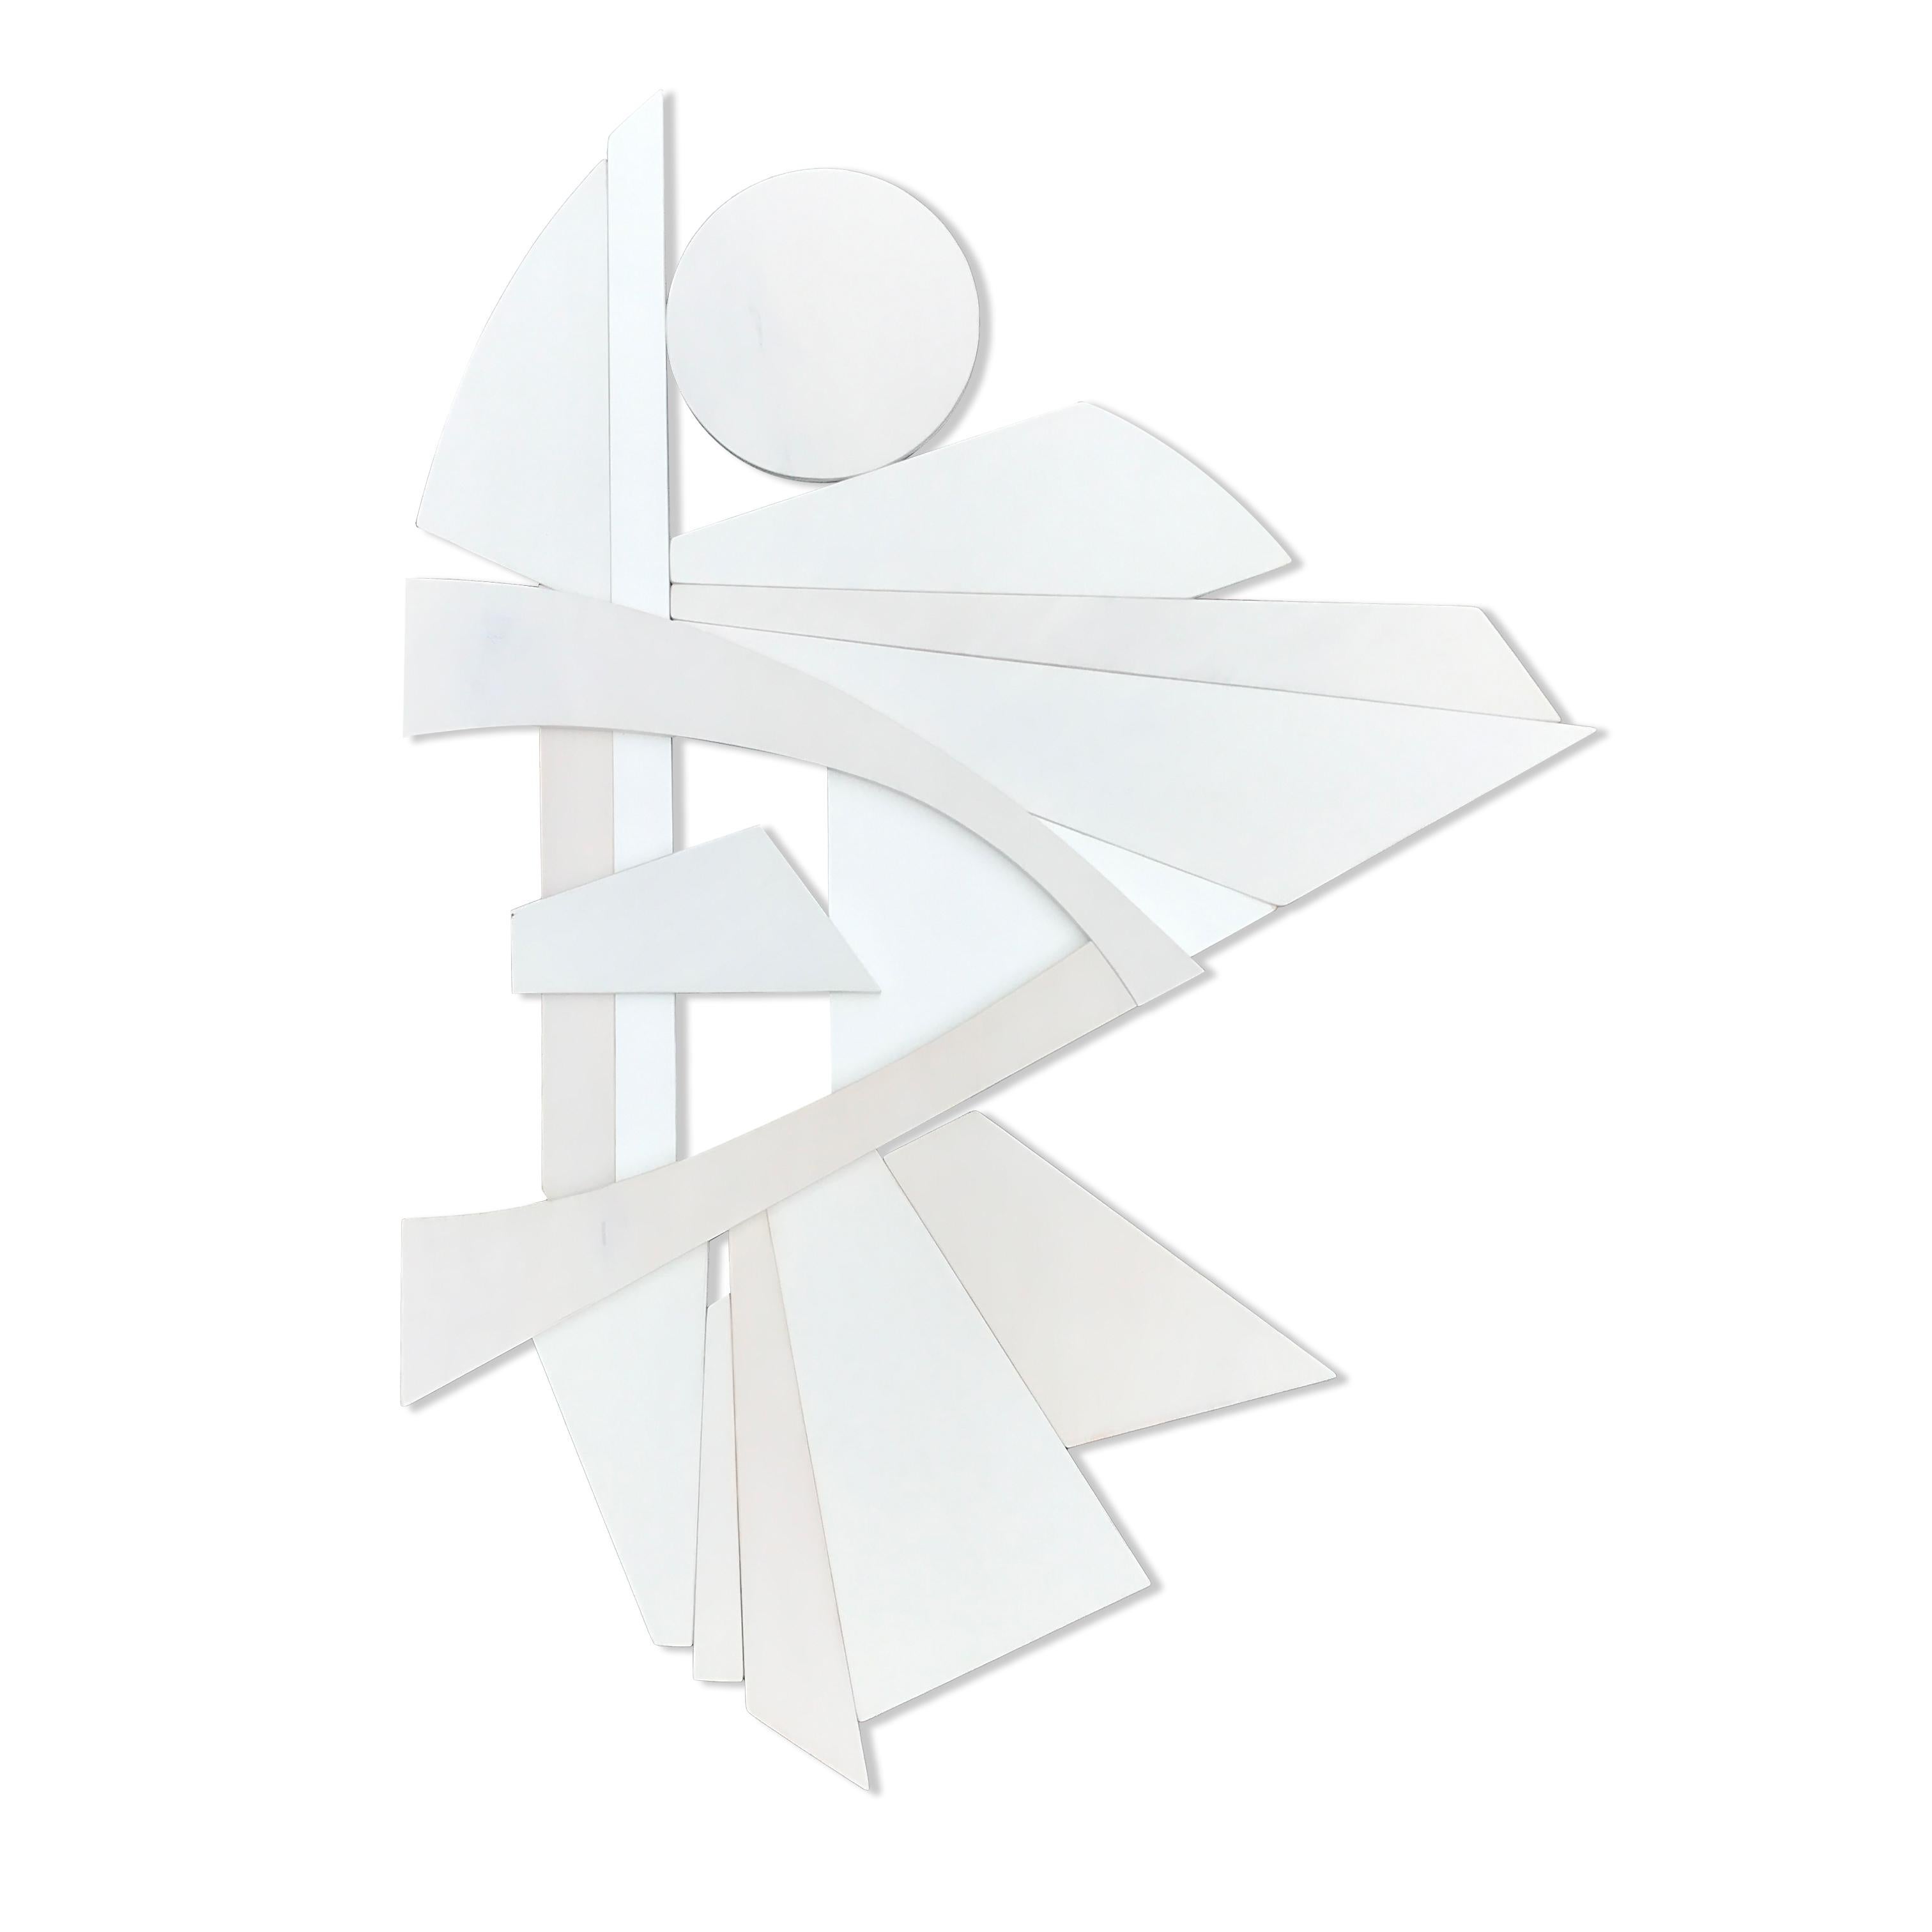 Scott Troxel Abstract Sculpture - "Ethereal" Mixed Media Wall Sculpture  (wood, white, monochrome, mcm, angel)